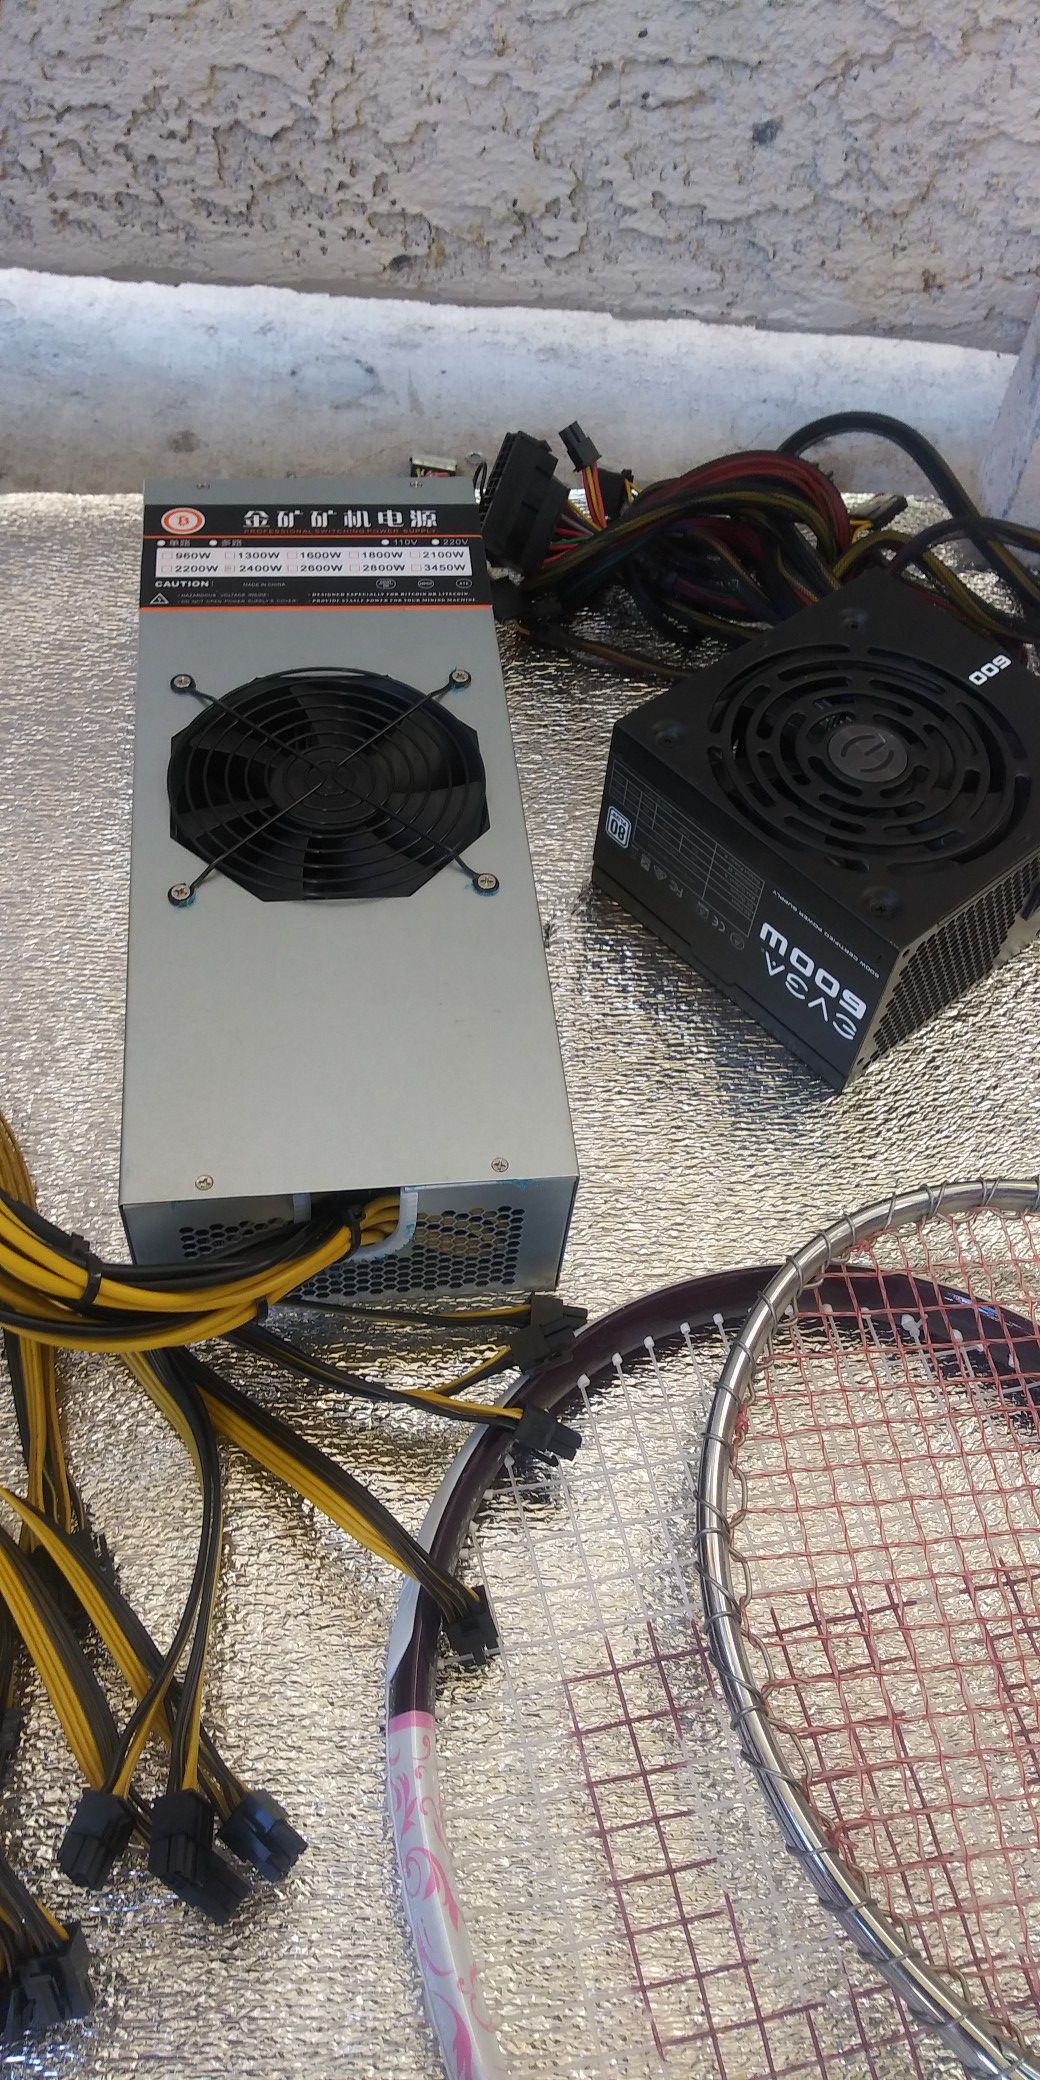 Bit coin (switching power supply) and M009 VEAE some computer parts